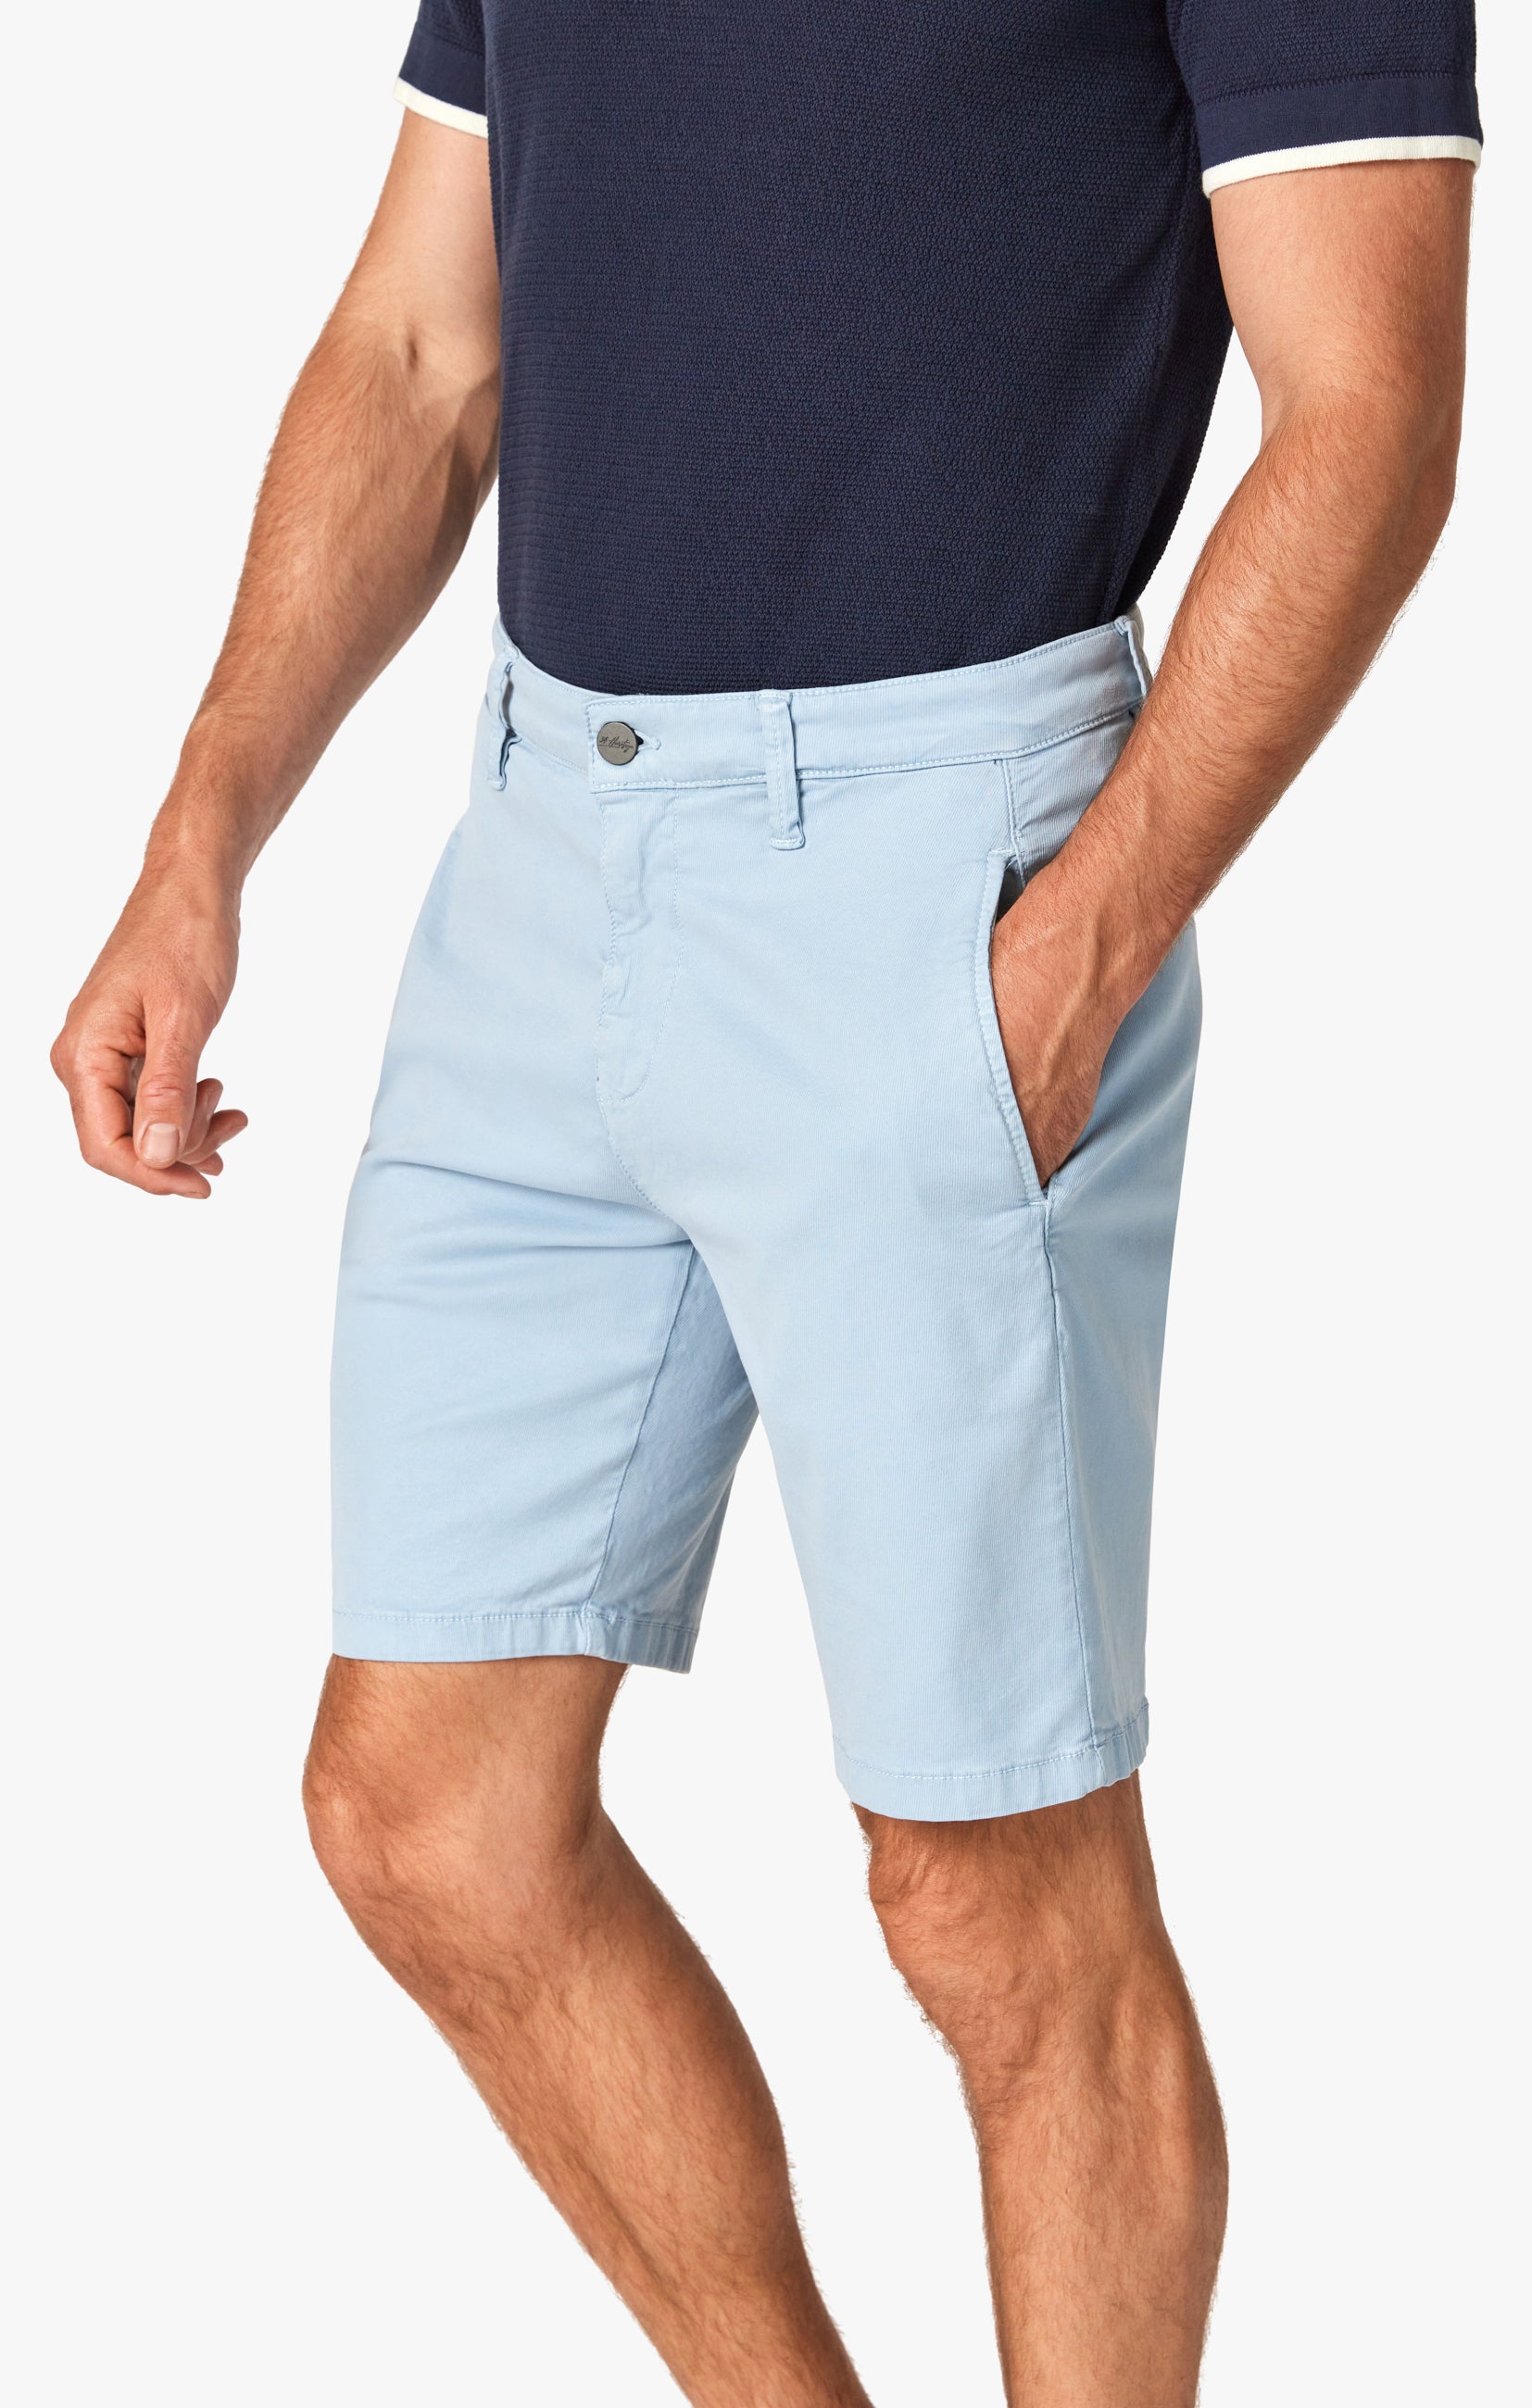 Nevada Shorts In Faded Denim Soft Touch Image 3